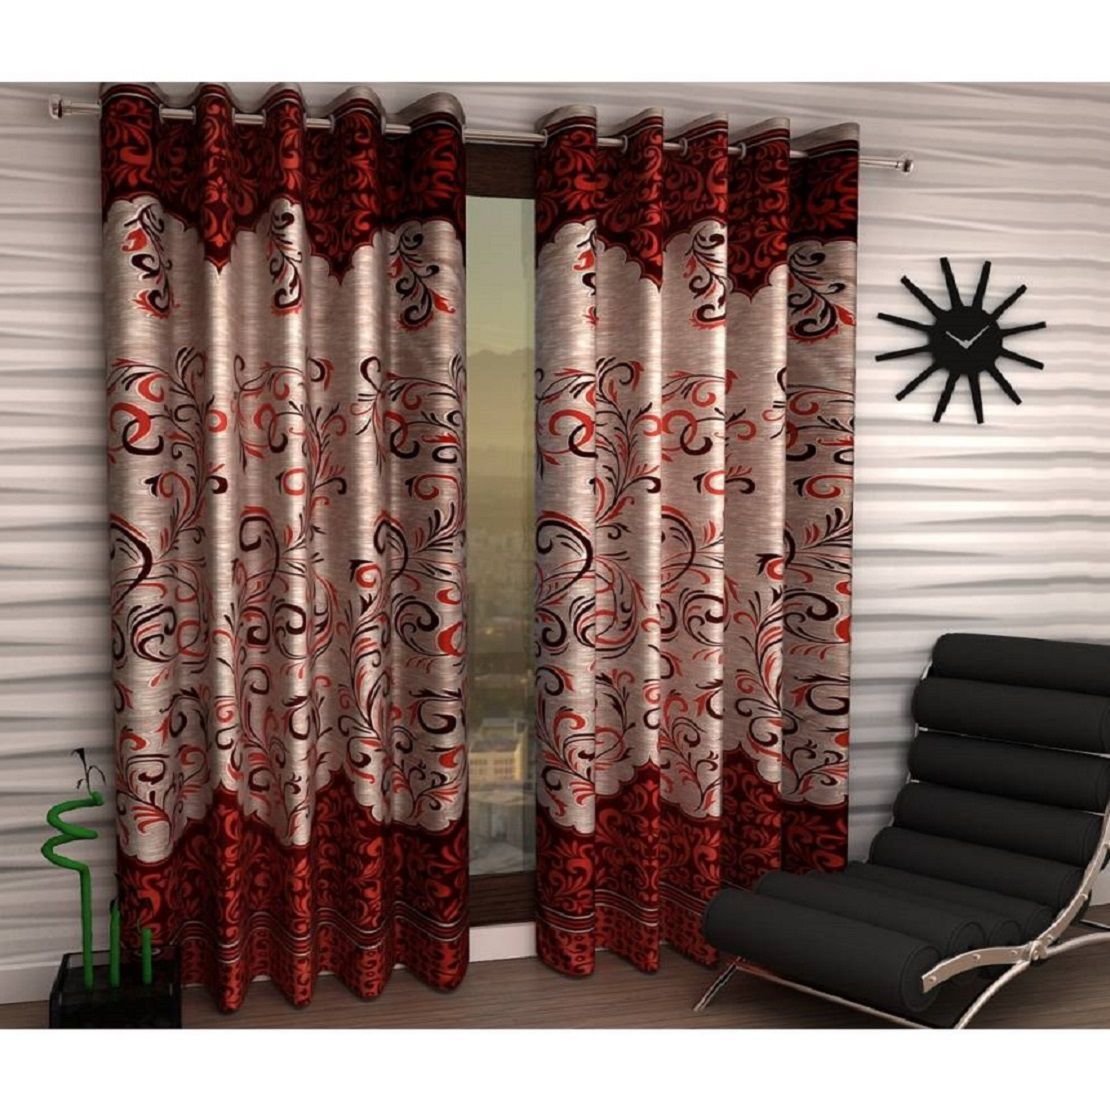     			Phyto Home Printed Semi-Transparent Eyelet Window Curtain 5 ft Pack of 4 -Multi Color